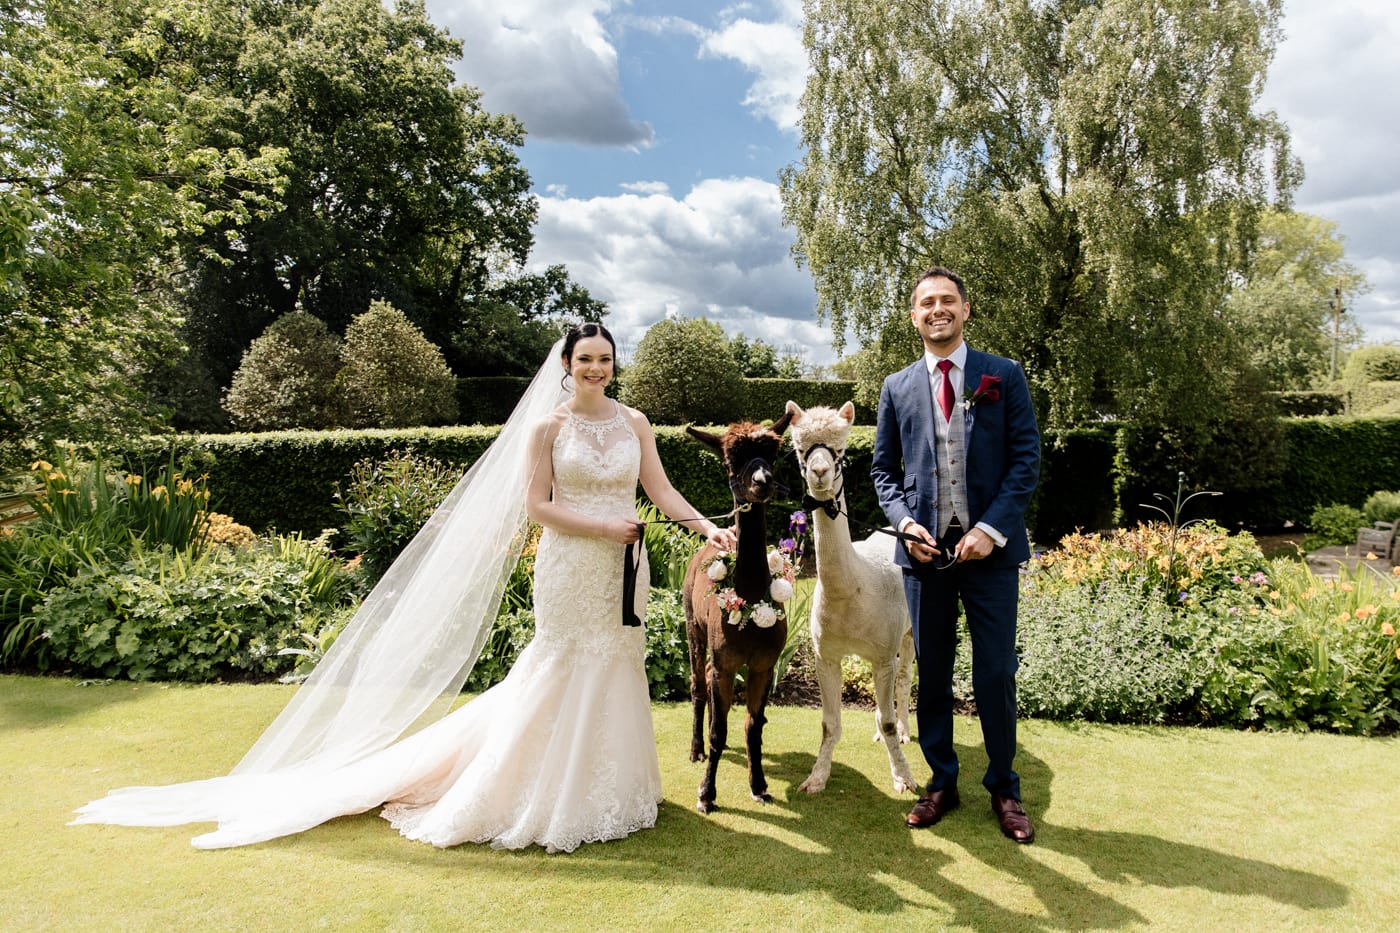 Alpacas at the Hilltop Country House Hotel in macclesfield, cheshire alpacas at a wedding